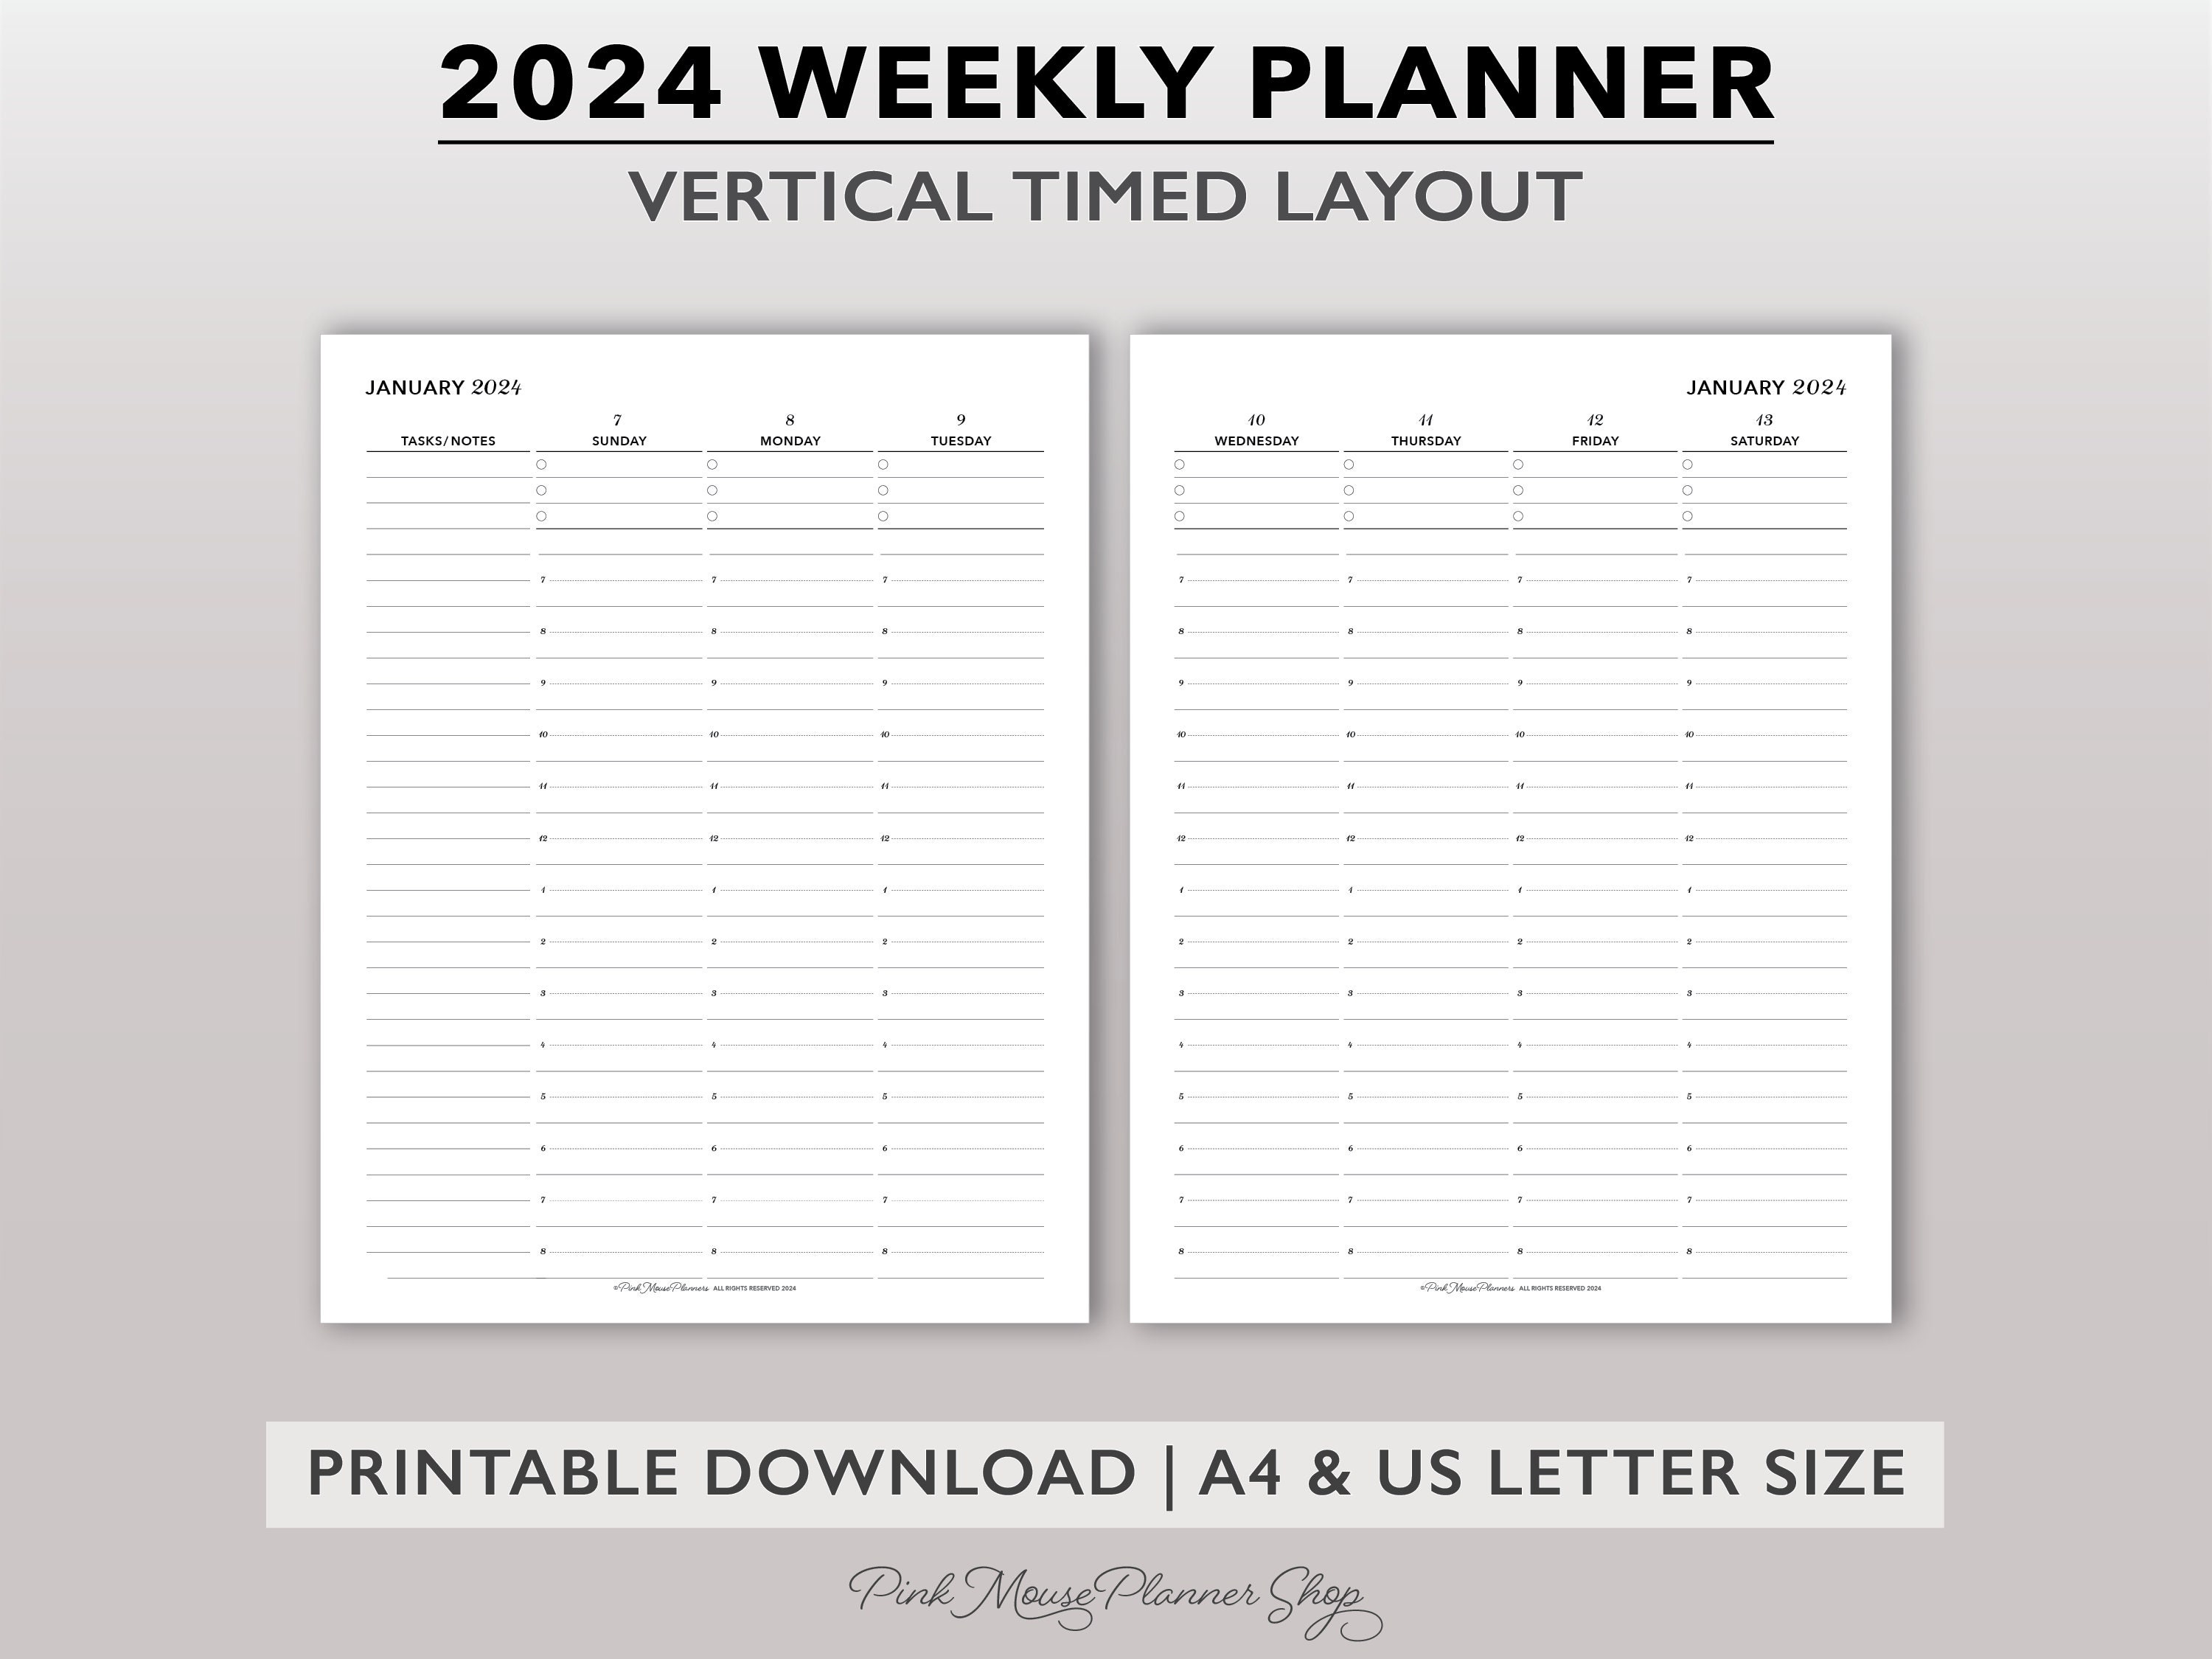 2024 Notable Memory A4 Dated Weekly Planner Agenda